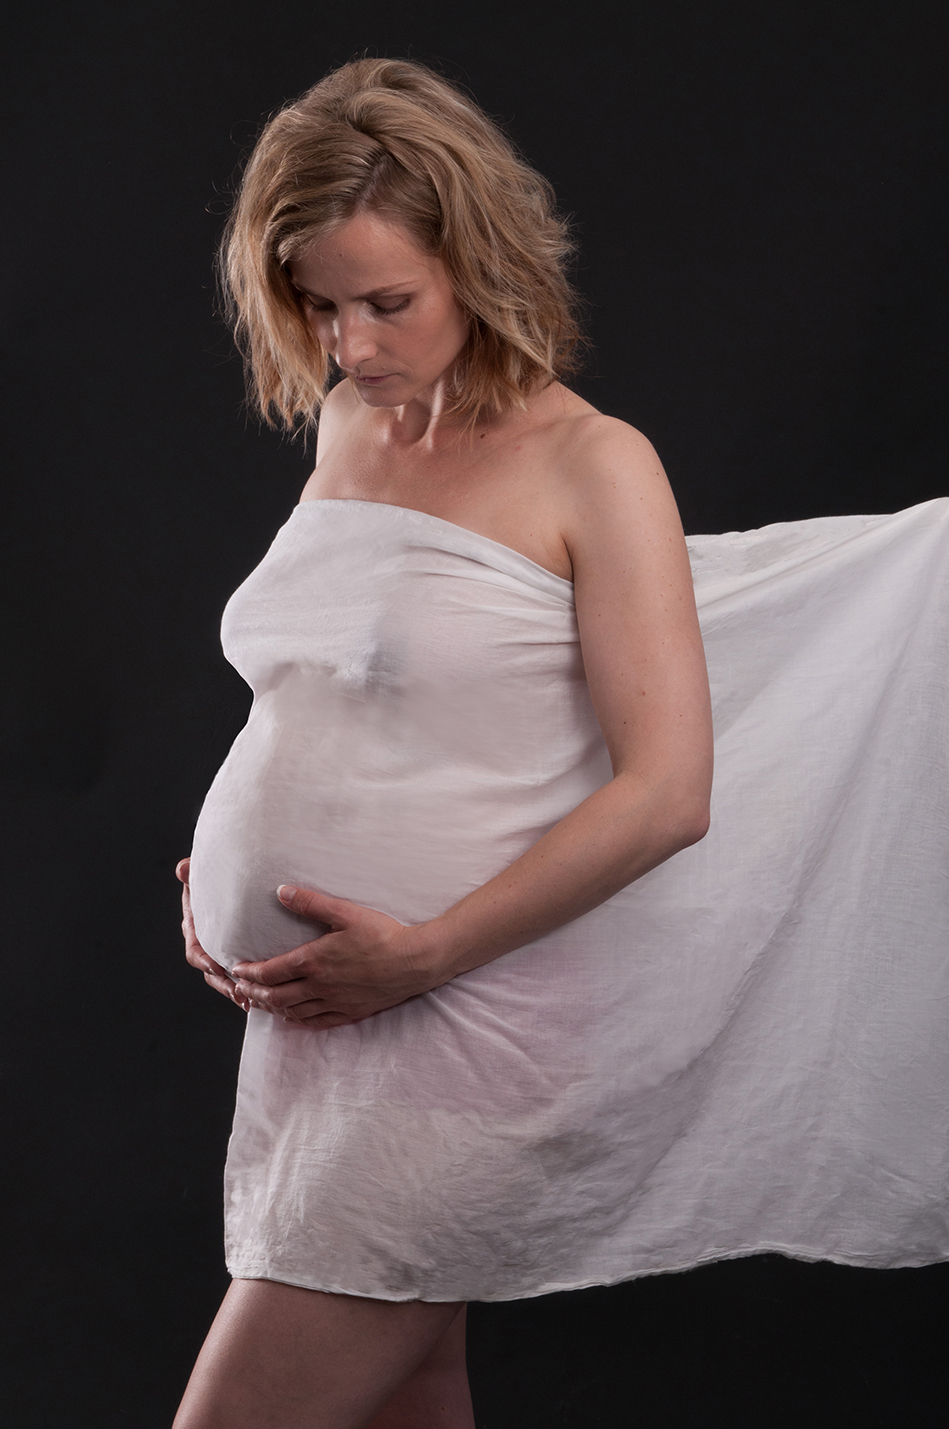 Pregnant woman wrapped Cotton Sheet on baby bump by Anais Chaine Auckland Photographer